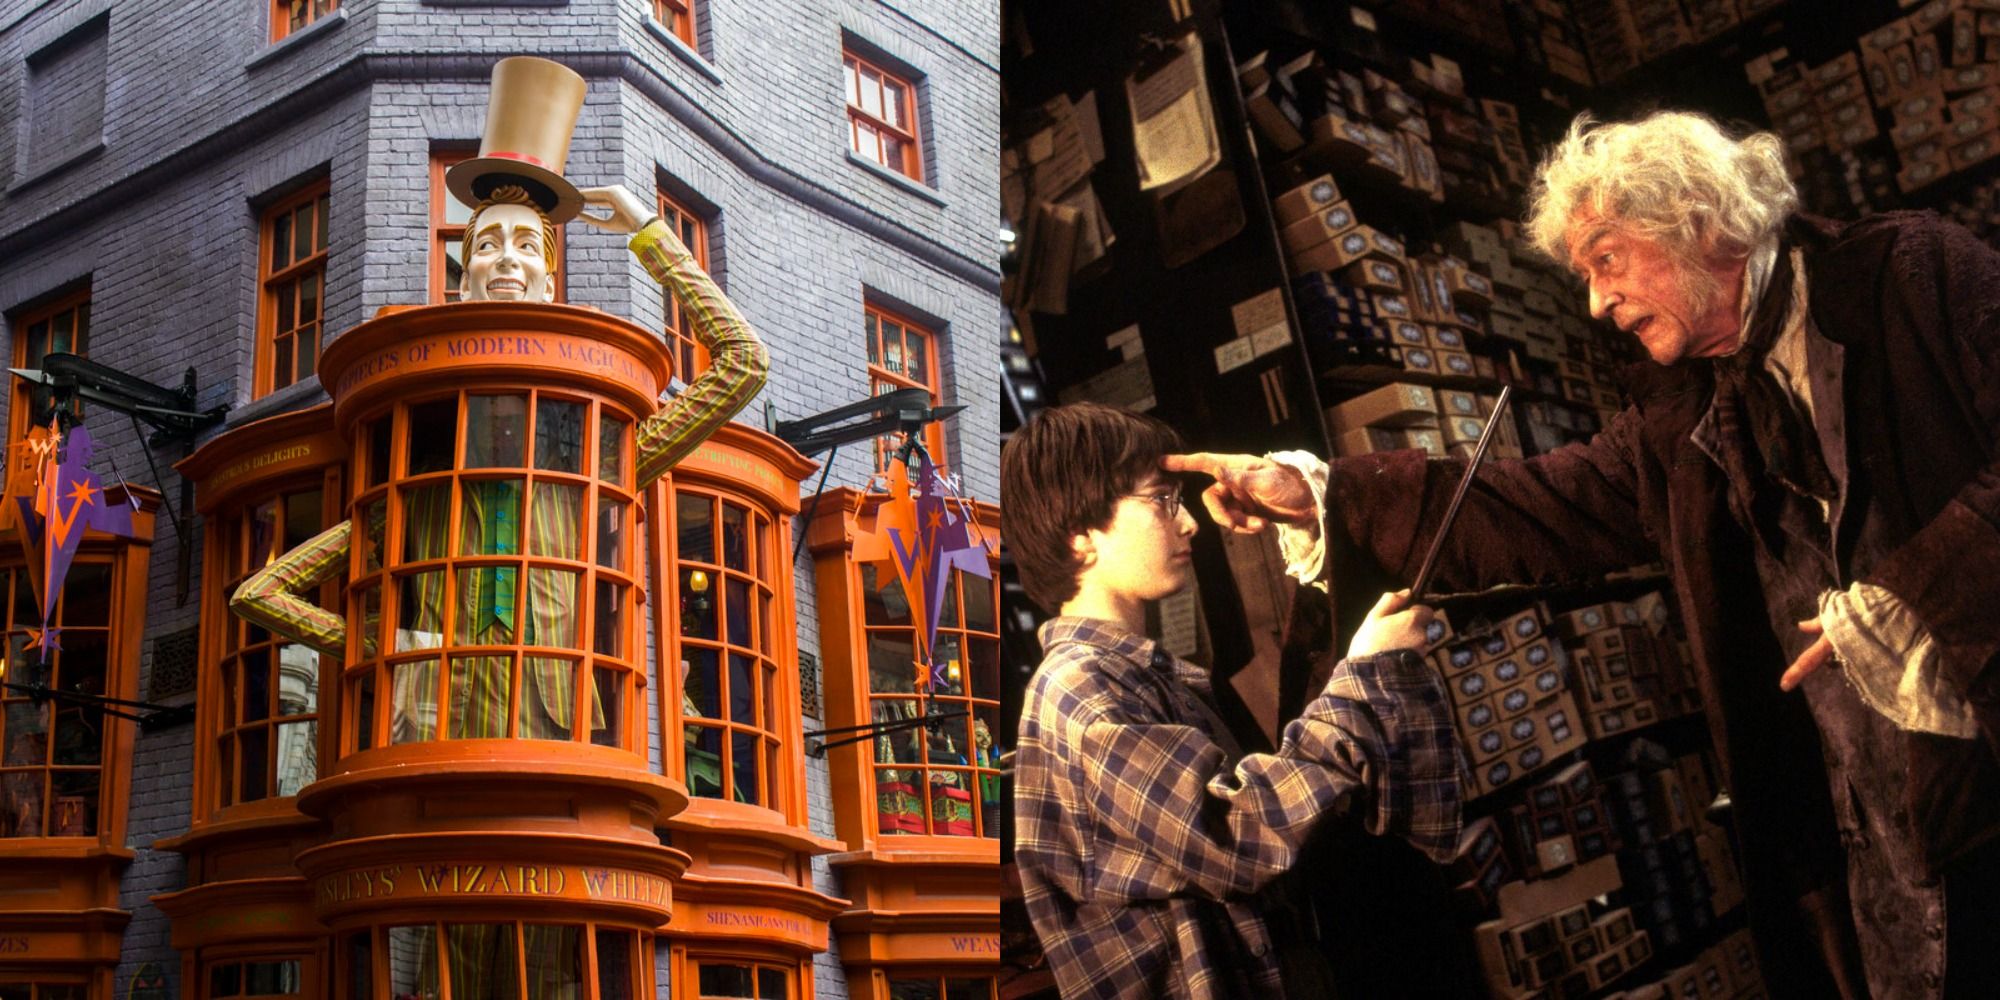 Split image showing the exterior of Weasley's Wizarding Wheezes and the interior of Ollivanders in the Harry Potter franchise